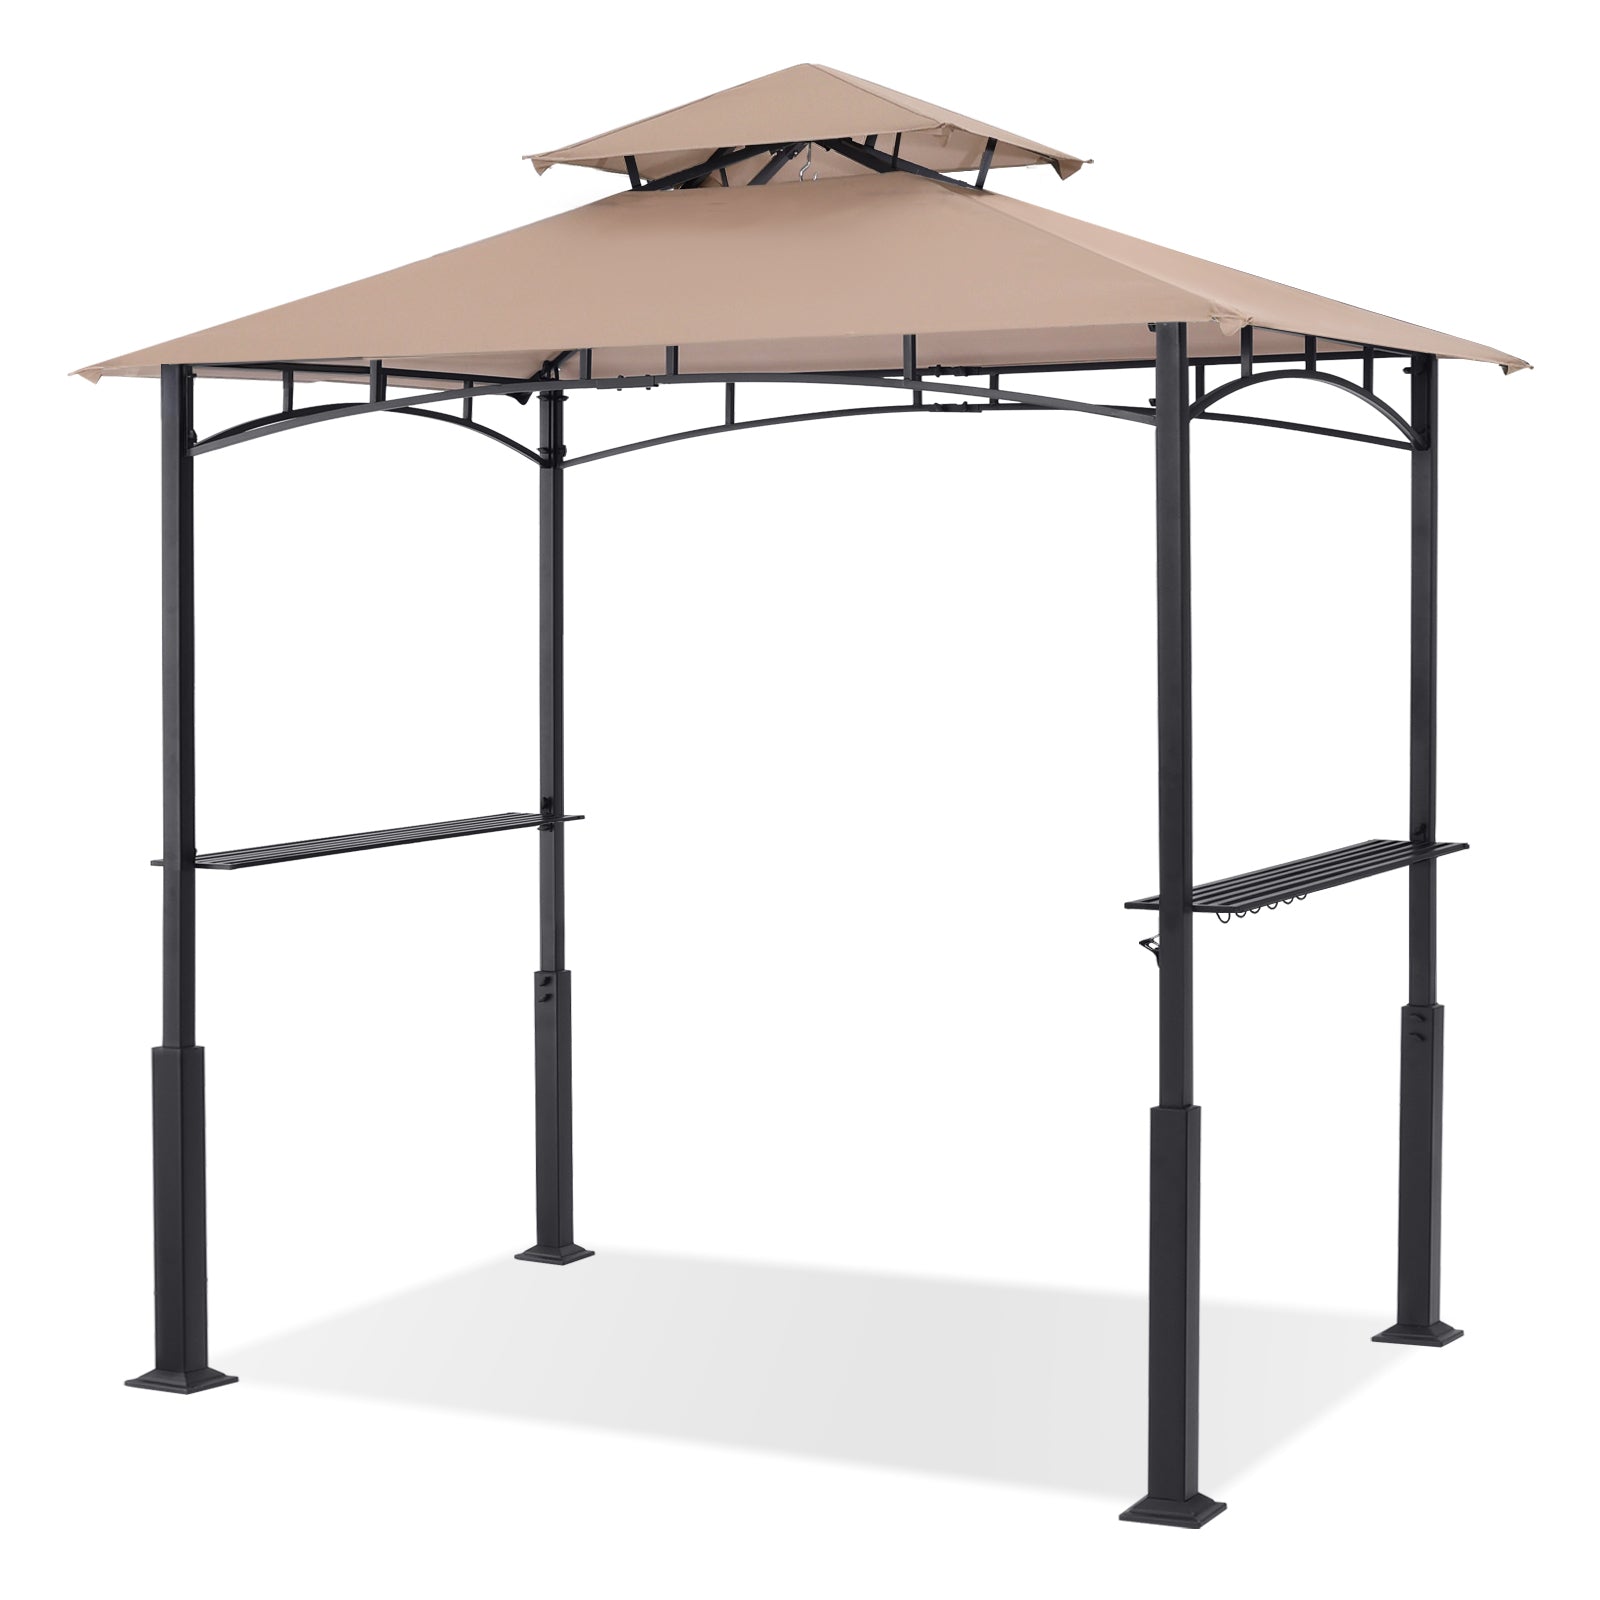 Outdoor 8x 5 Grill Gazebo Shelter for BBQ with LED Light